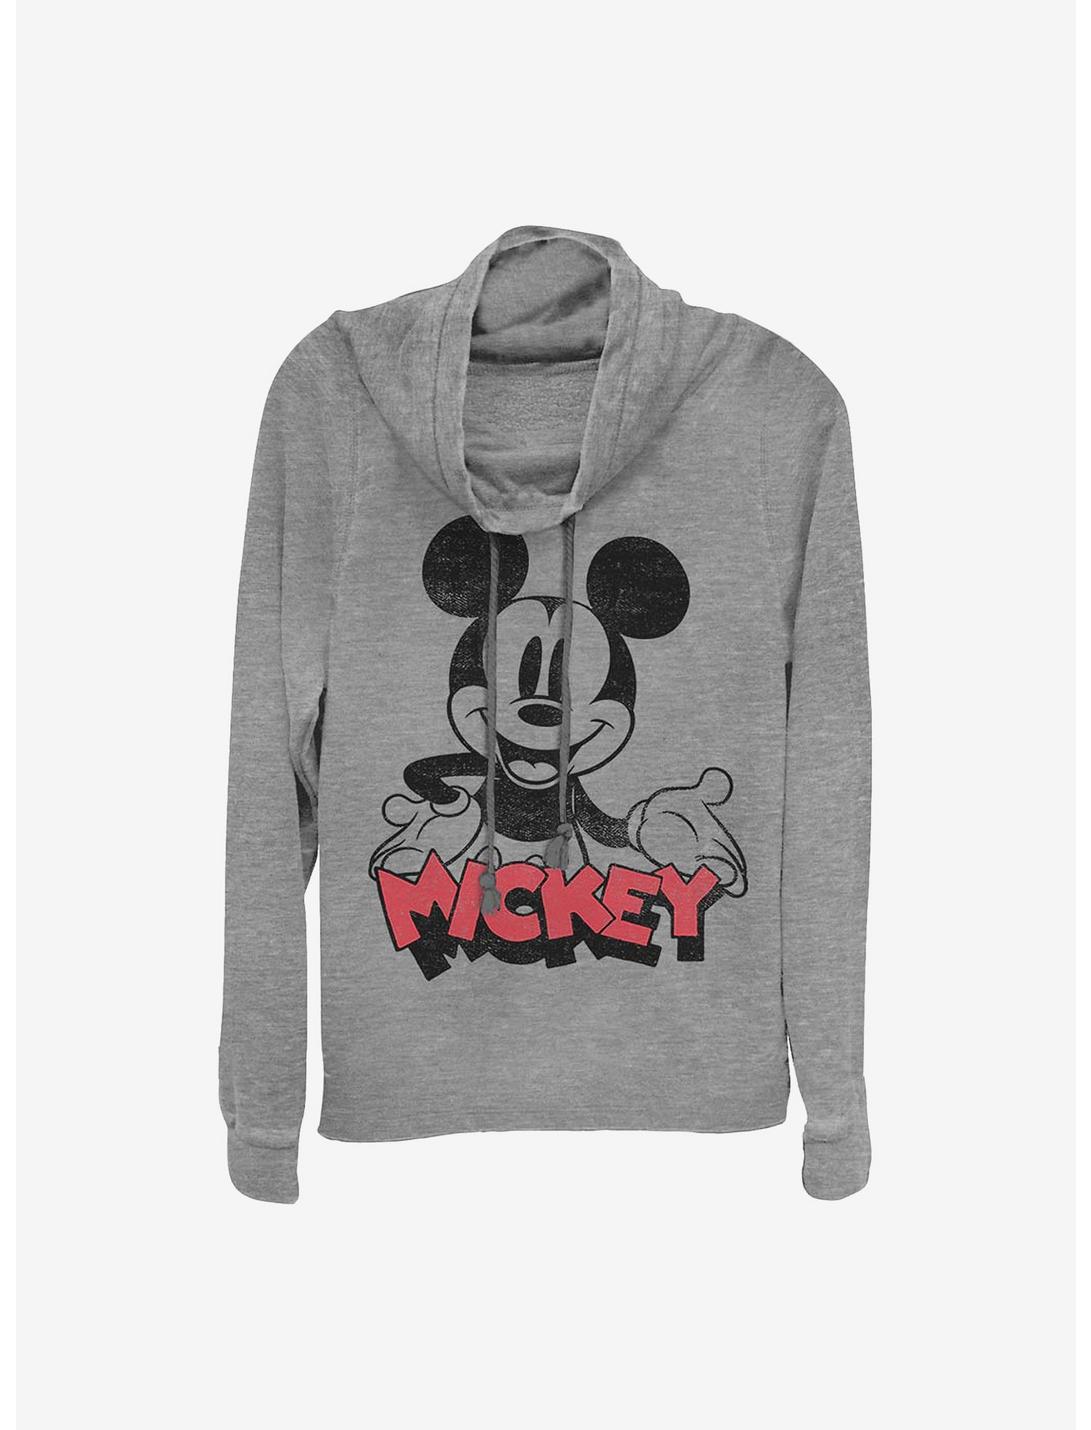 Disney Mickey Mouse Oh Boy Cowl Neck Long-Sleeve Womens Top, GRAY HTR, hi-res